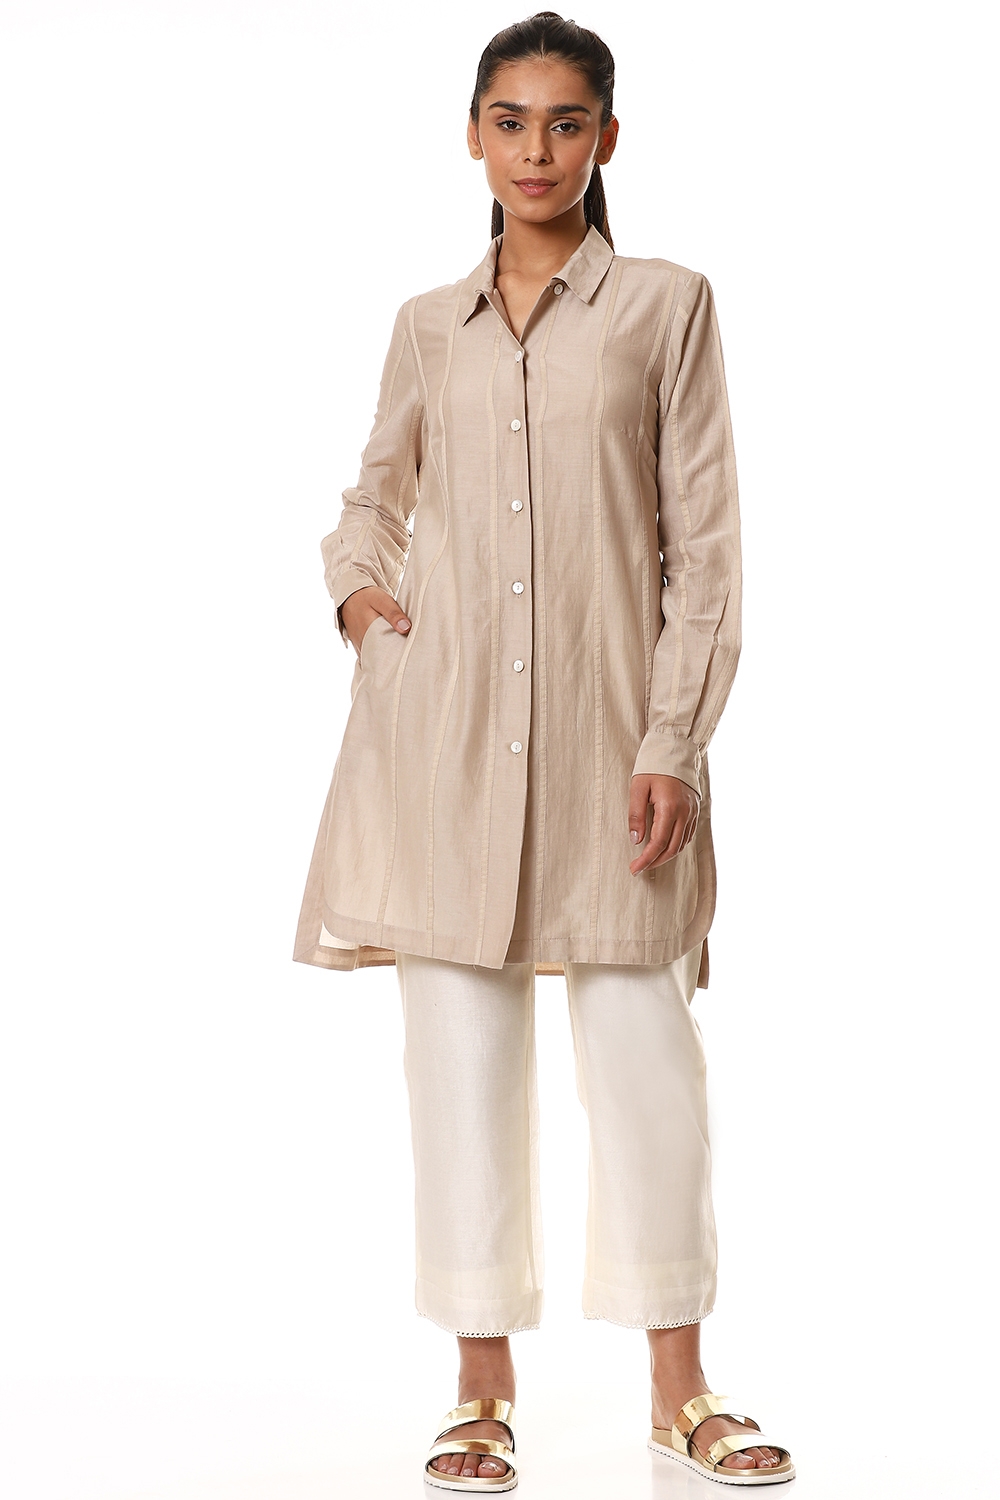 ABRAHAM AND THAKORE | Beige Patchwork Button Front Shirt